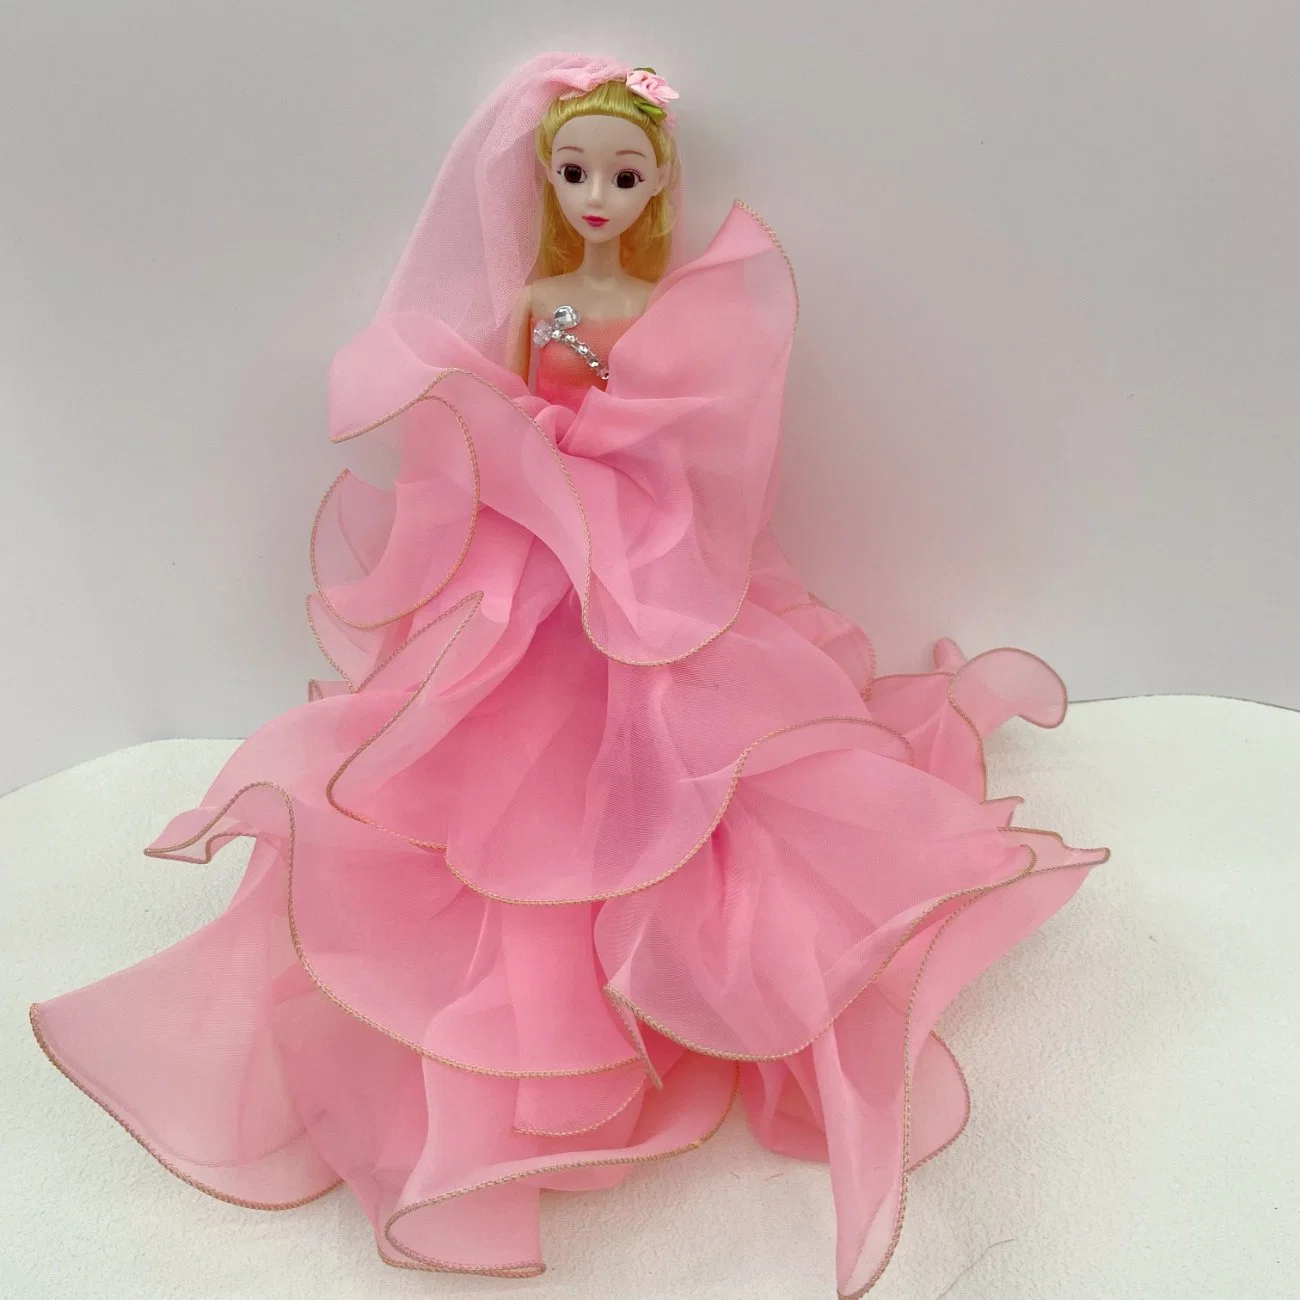 Wholesale Fashion Barbiees Dolls Princess Girl Toy Mini Doll or Dress up Clothes Accessories Princessmusic and Singing